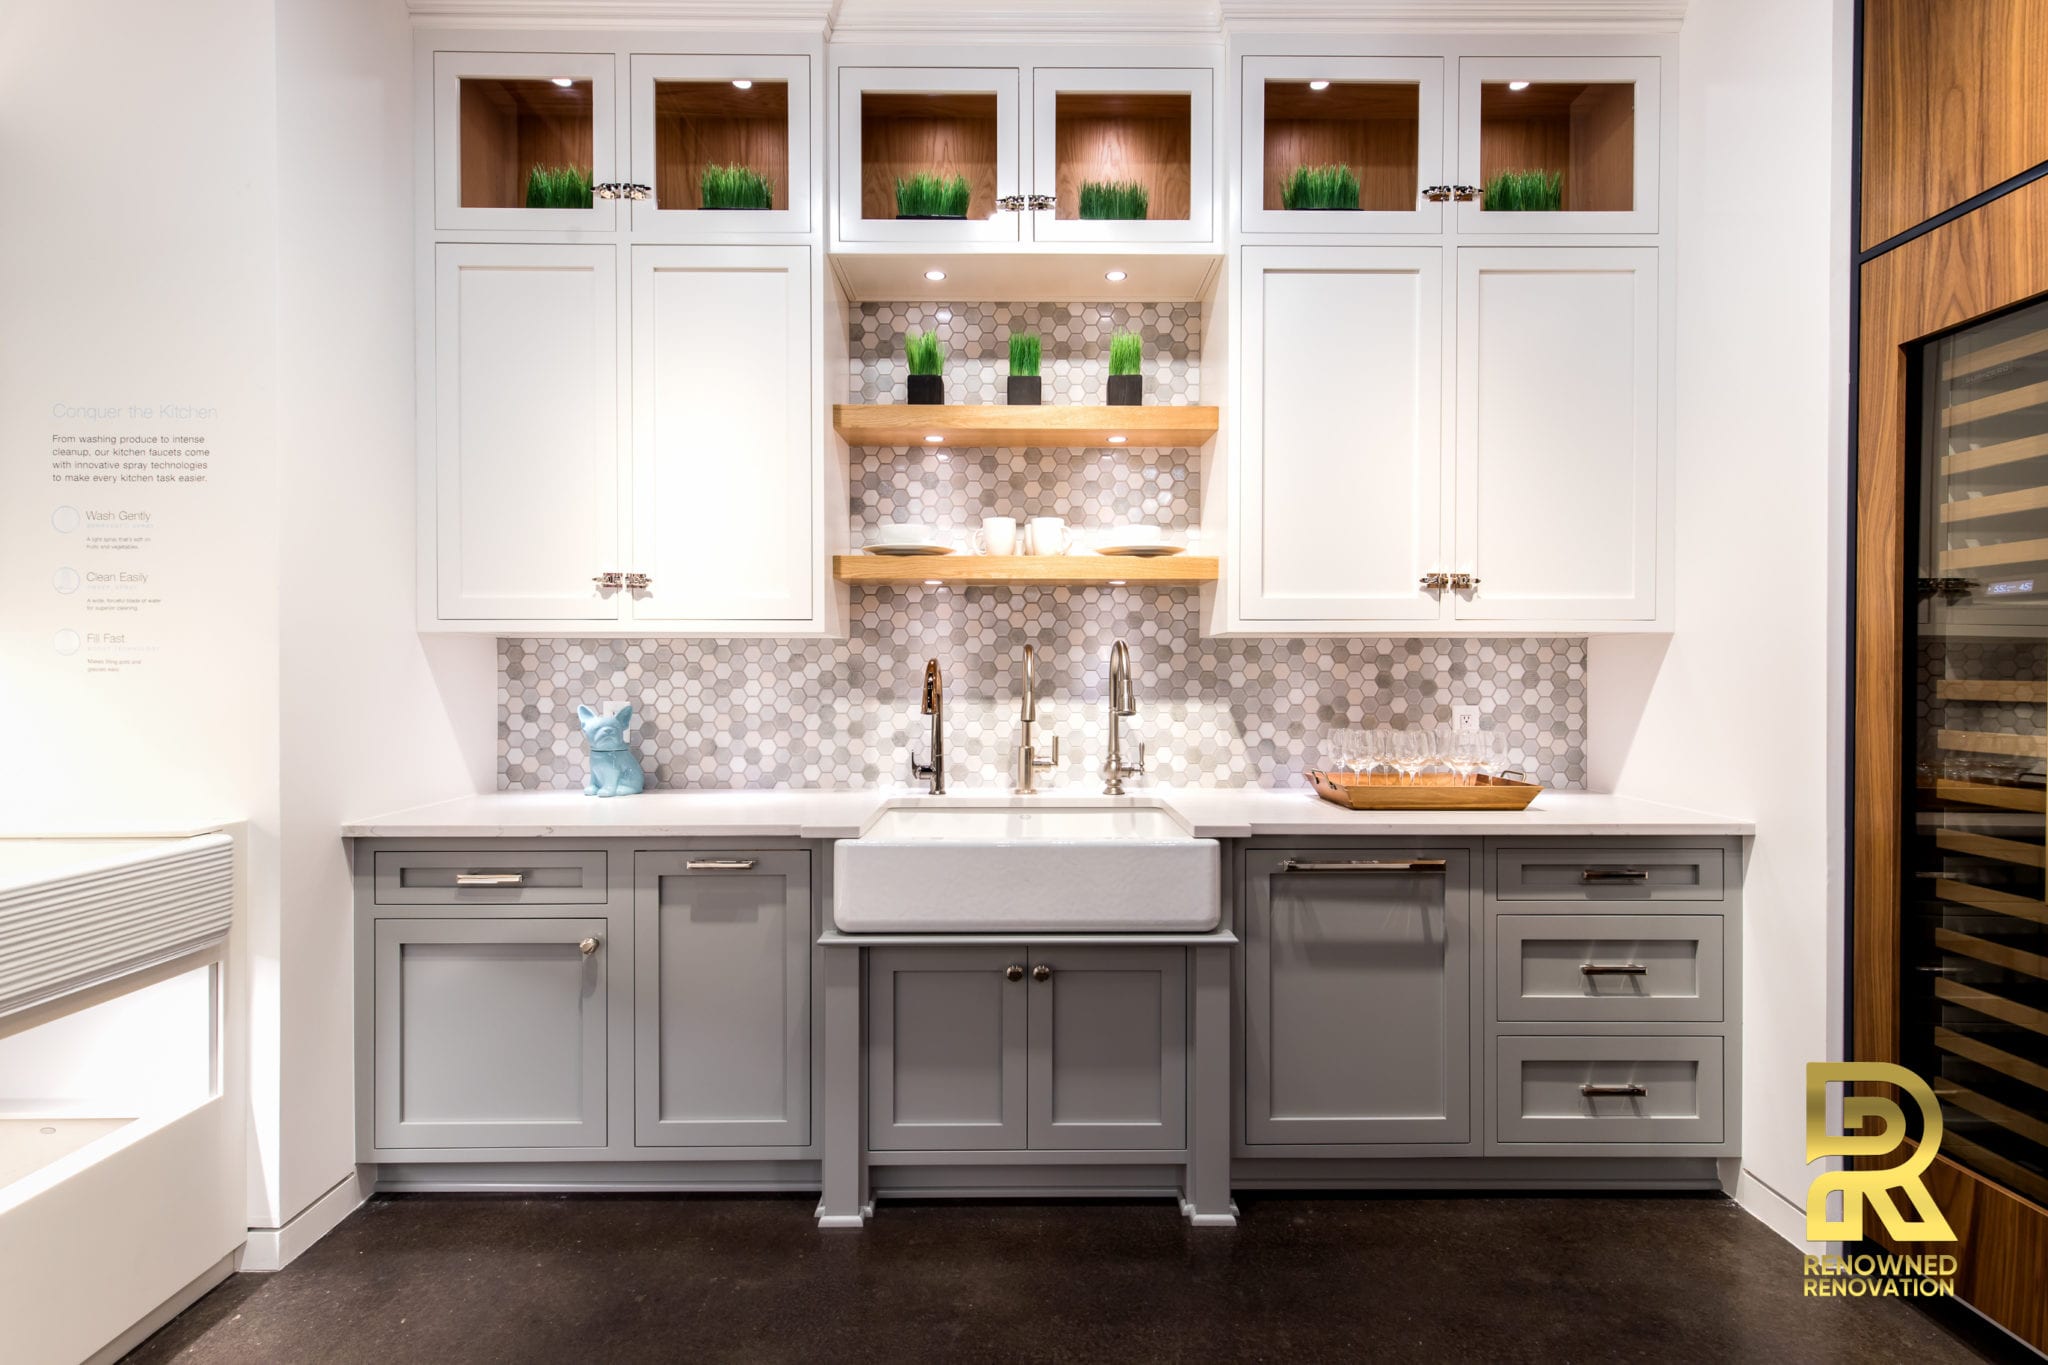 Kohler-Signature-Store-Dallas-StyleCraft-Cabinets-Designed-by-Renowned-Renovation0